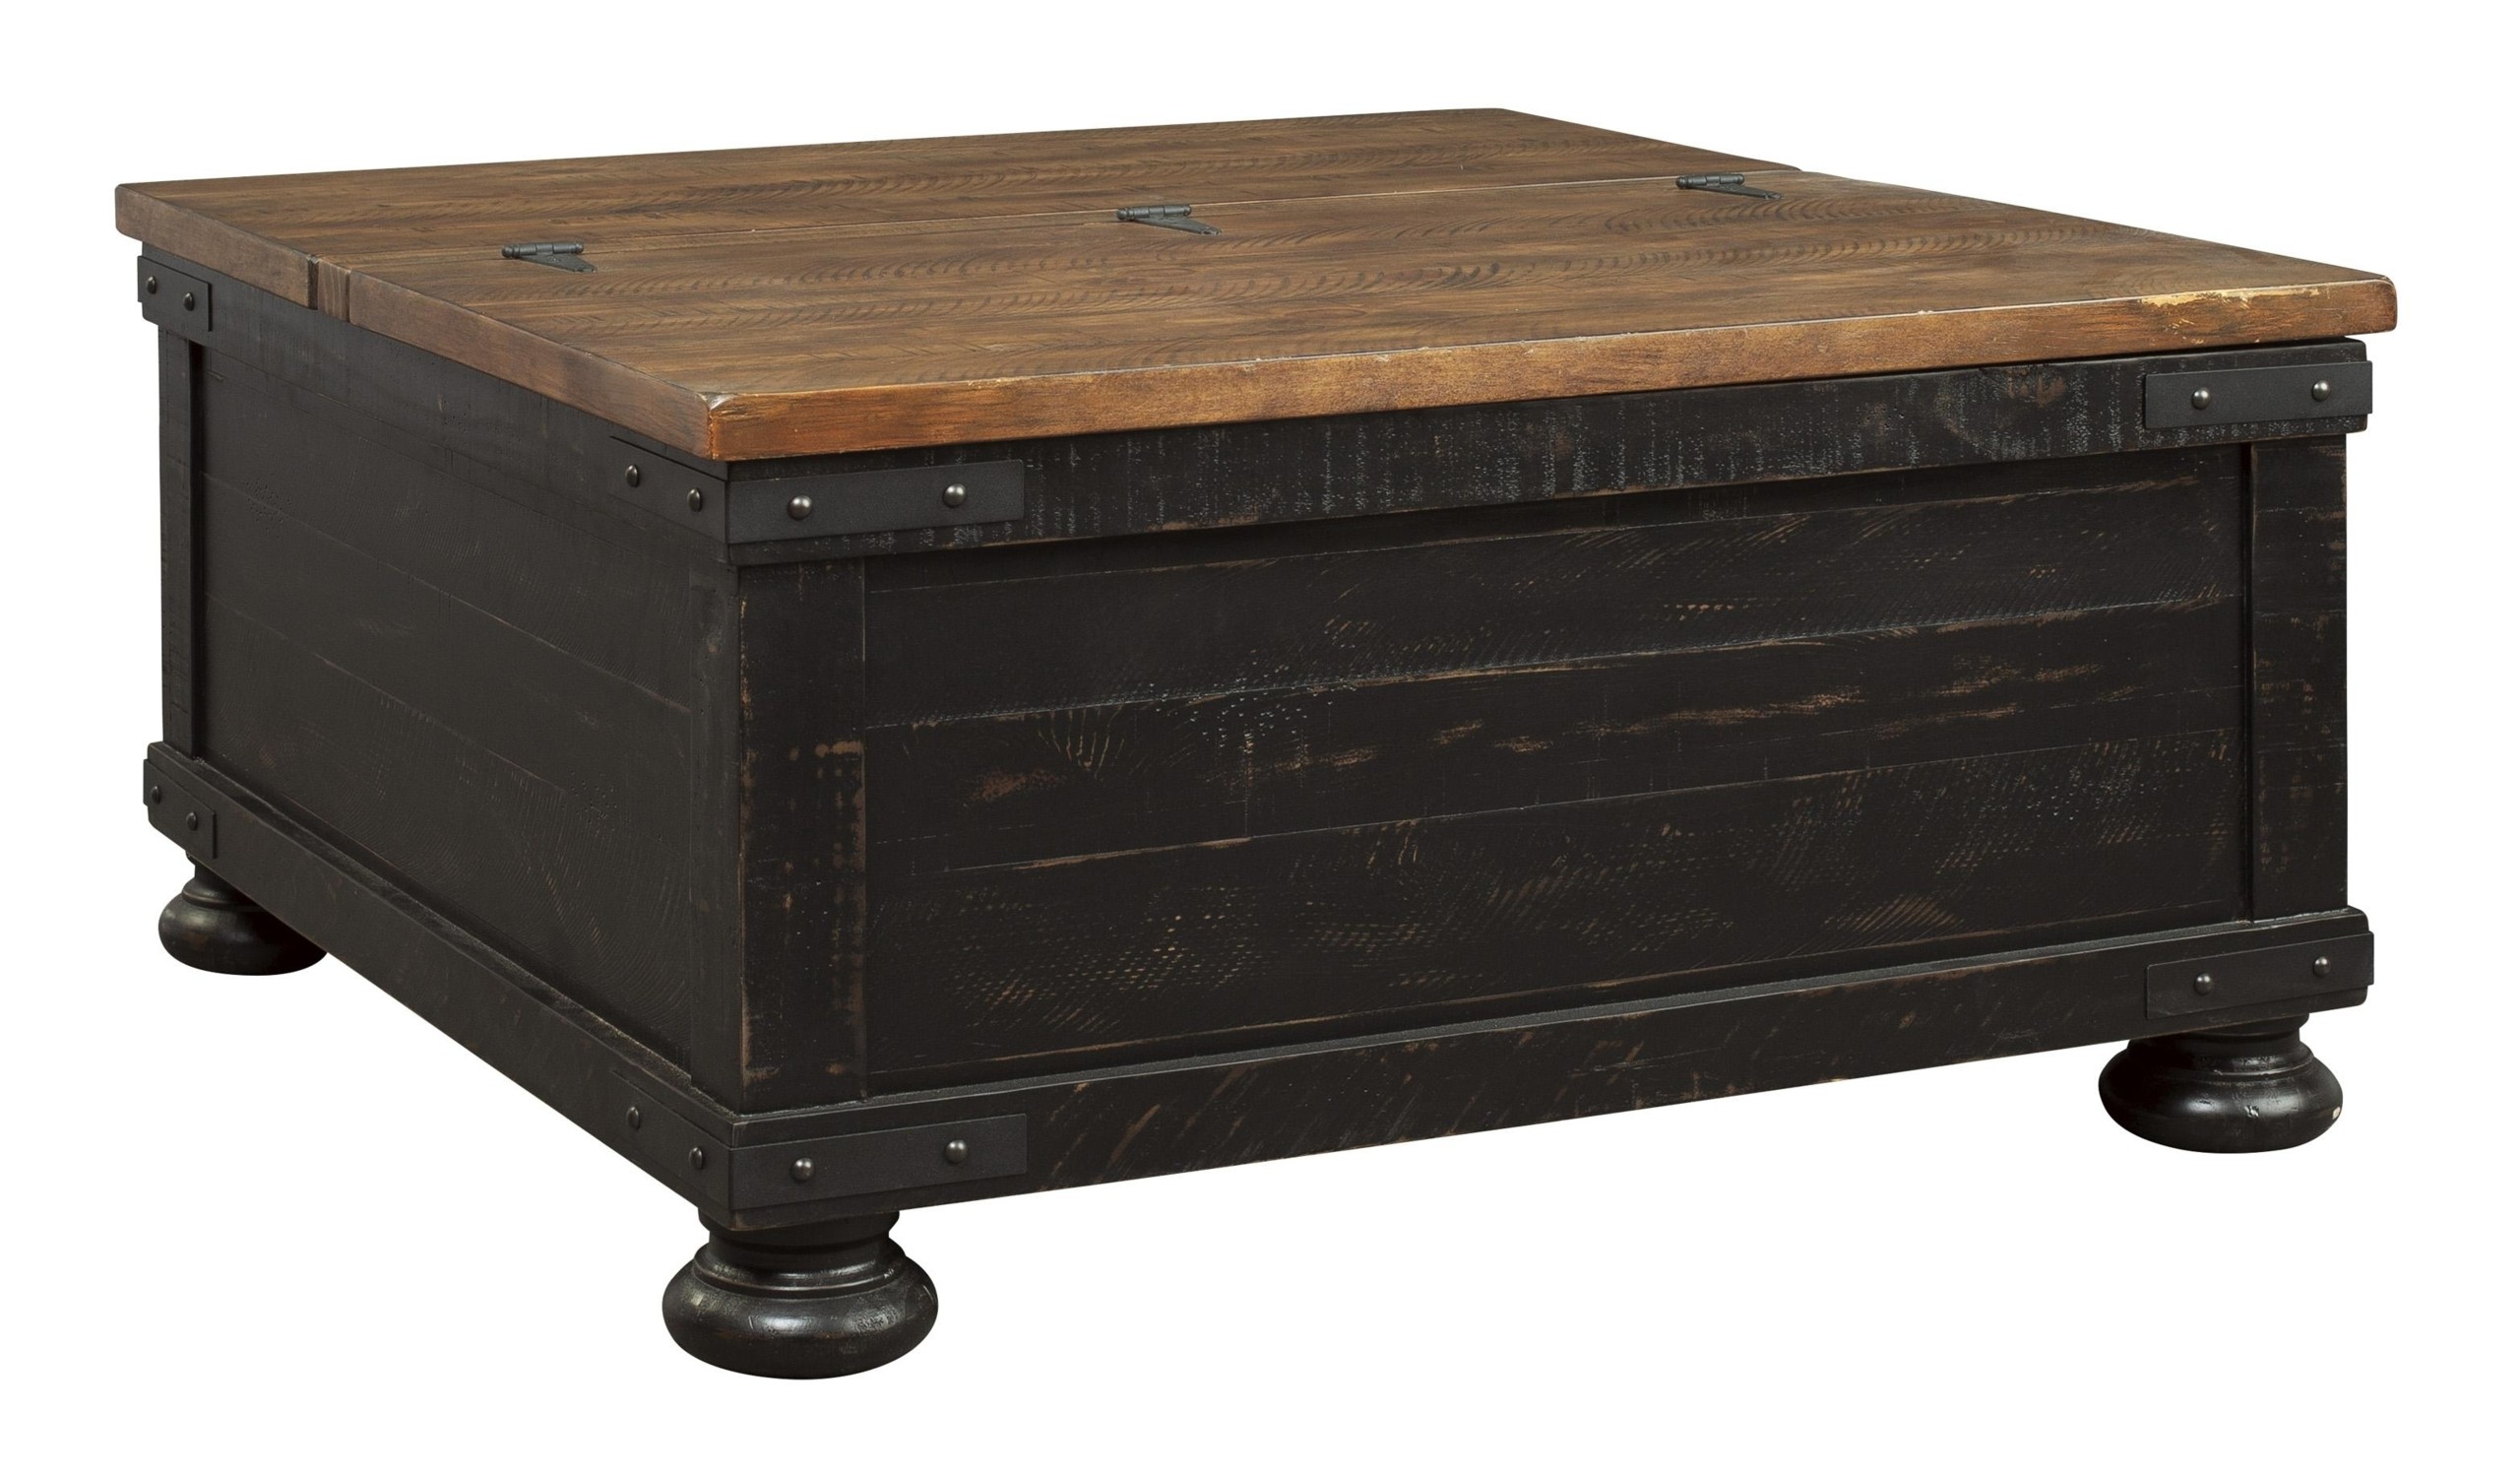 Square wooden lift top cocktail table with trunk storage